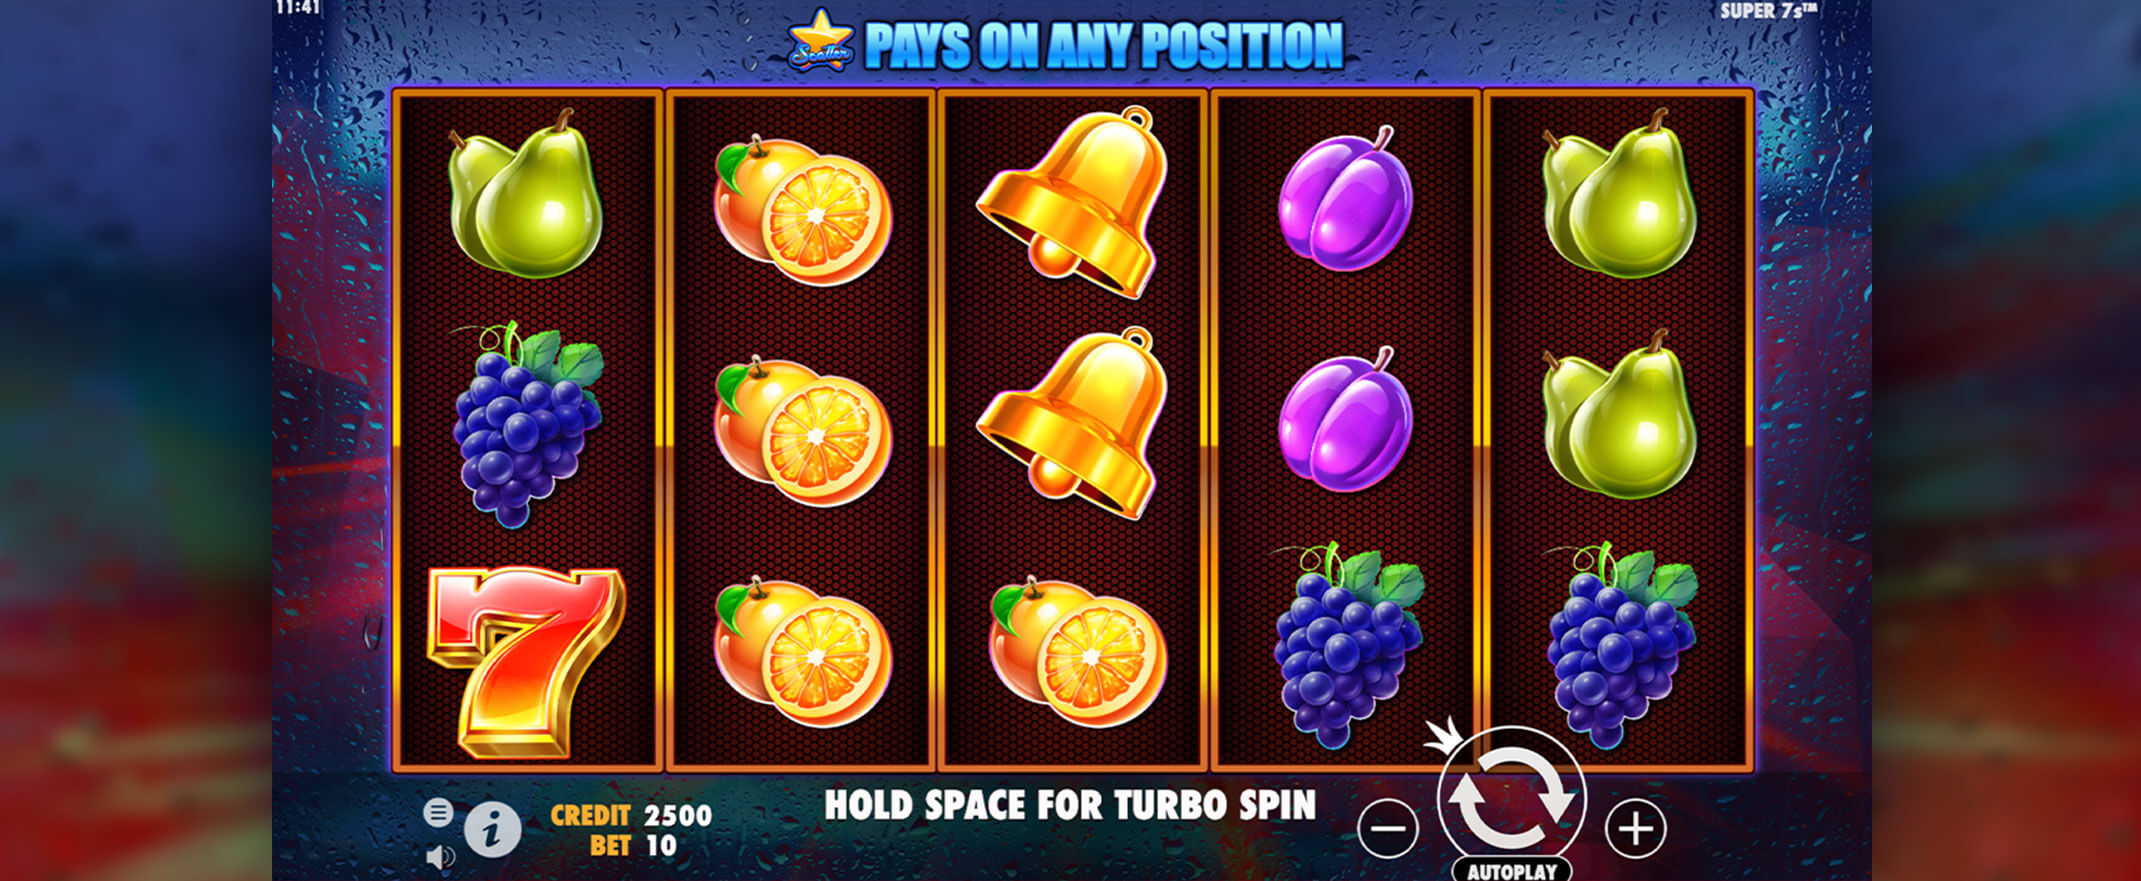 Super 7s slot from Pragmatic Play - a screenshot of the reels